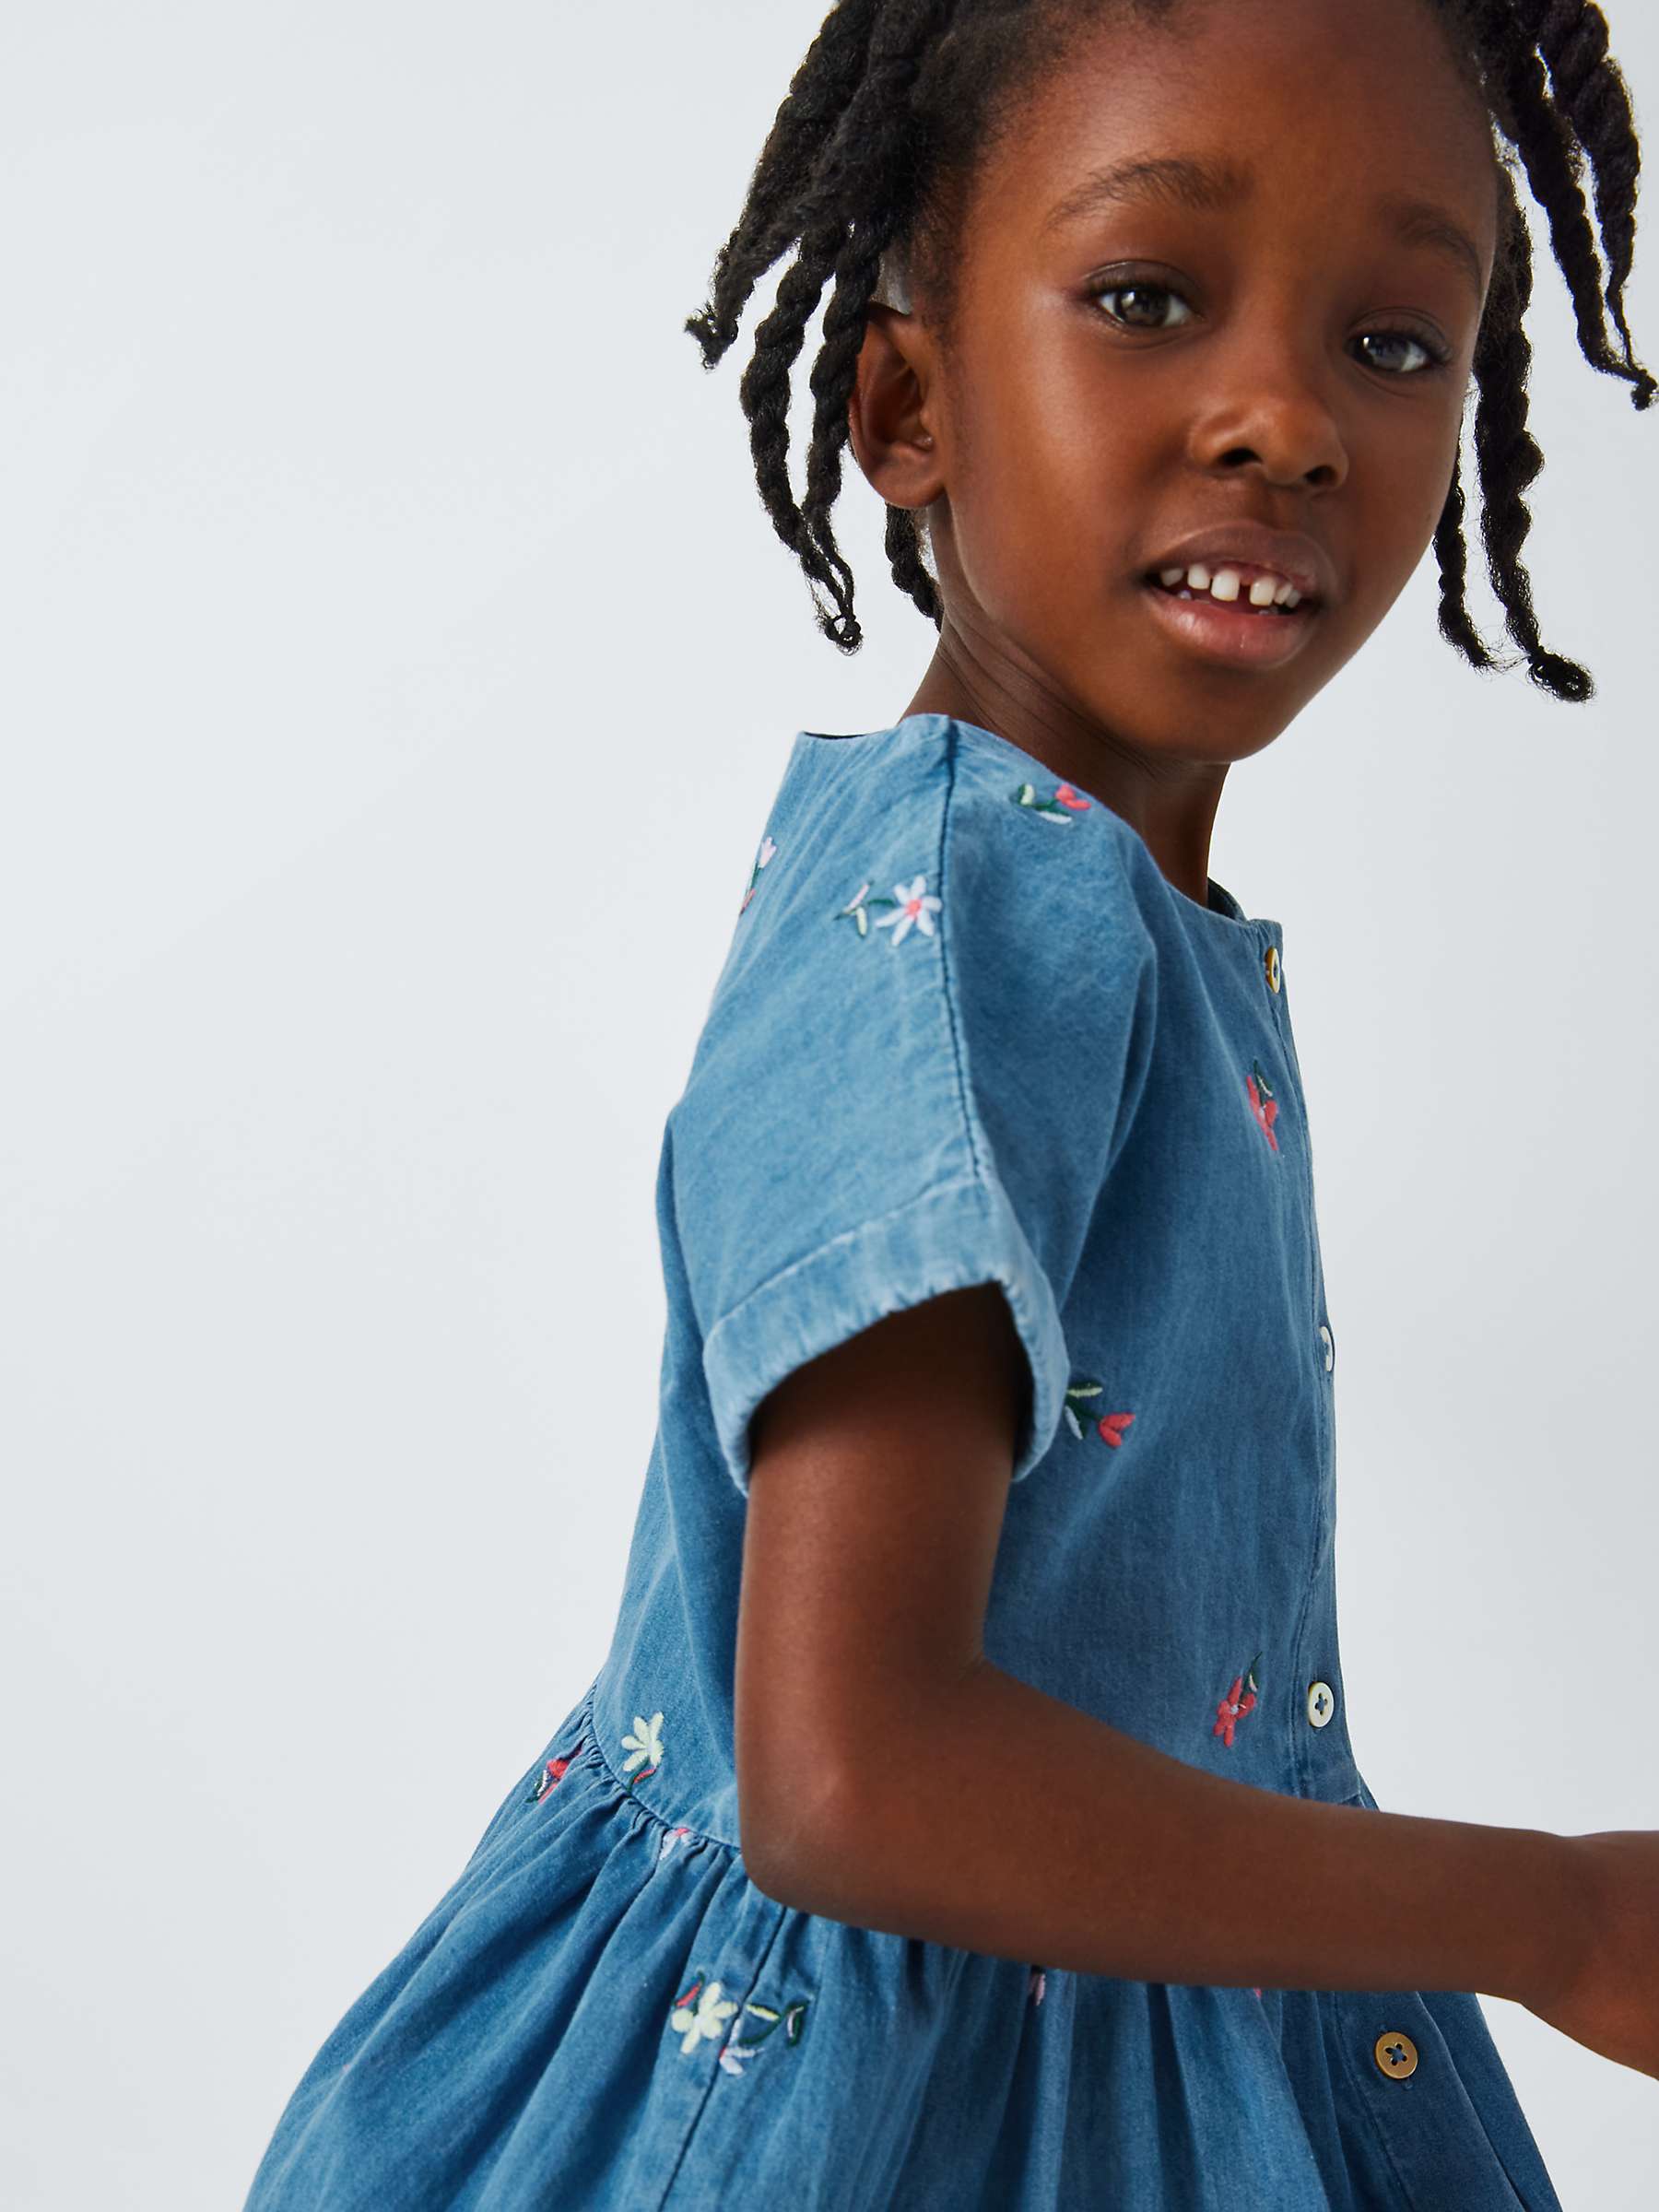 Buy John Lewis Kids' Chambray Embroidered Flowers Dress, Blue Online at johnlewis.com